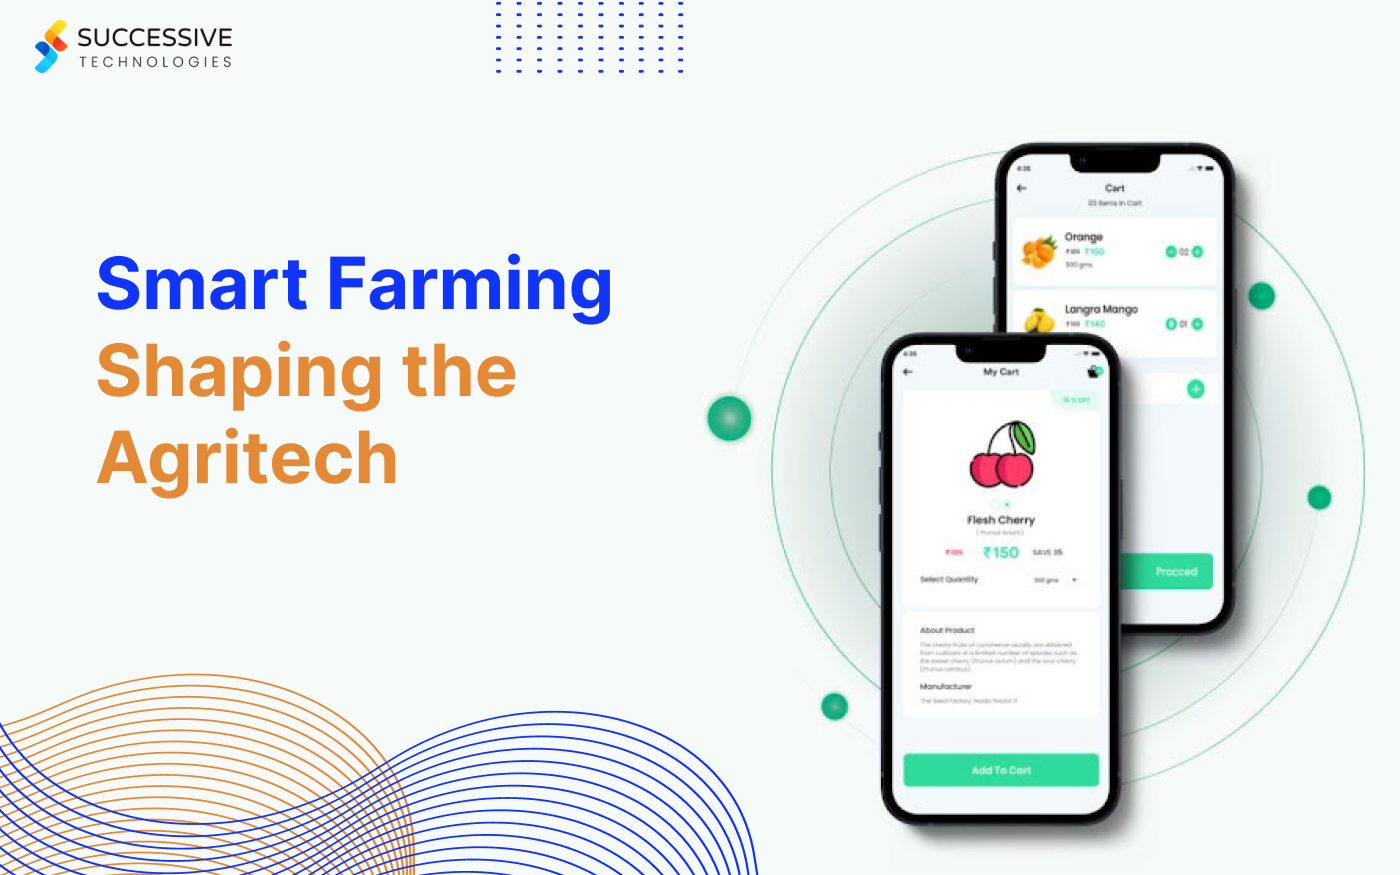 Smart Farming Shaping the Future of Agritech